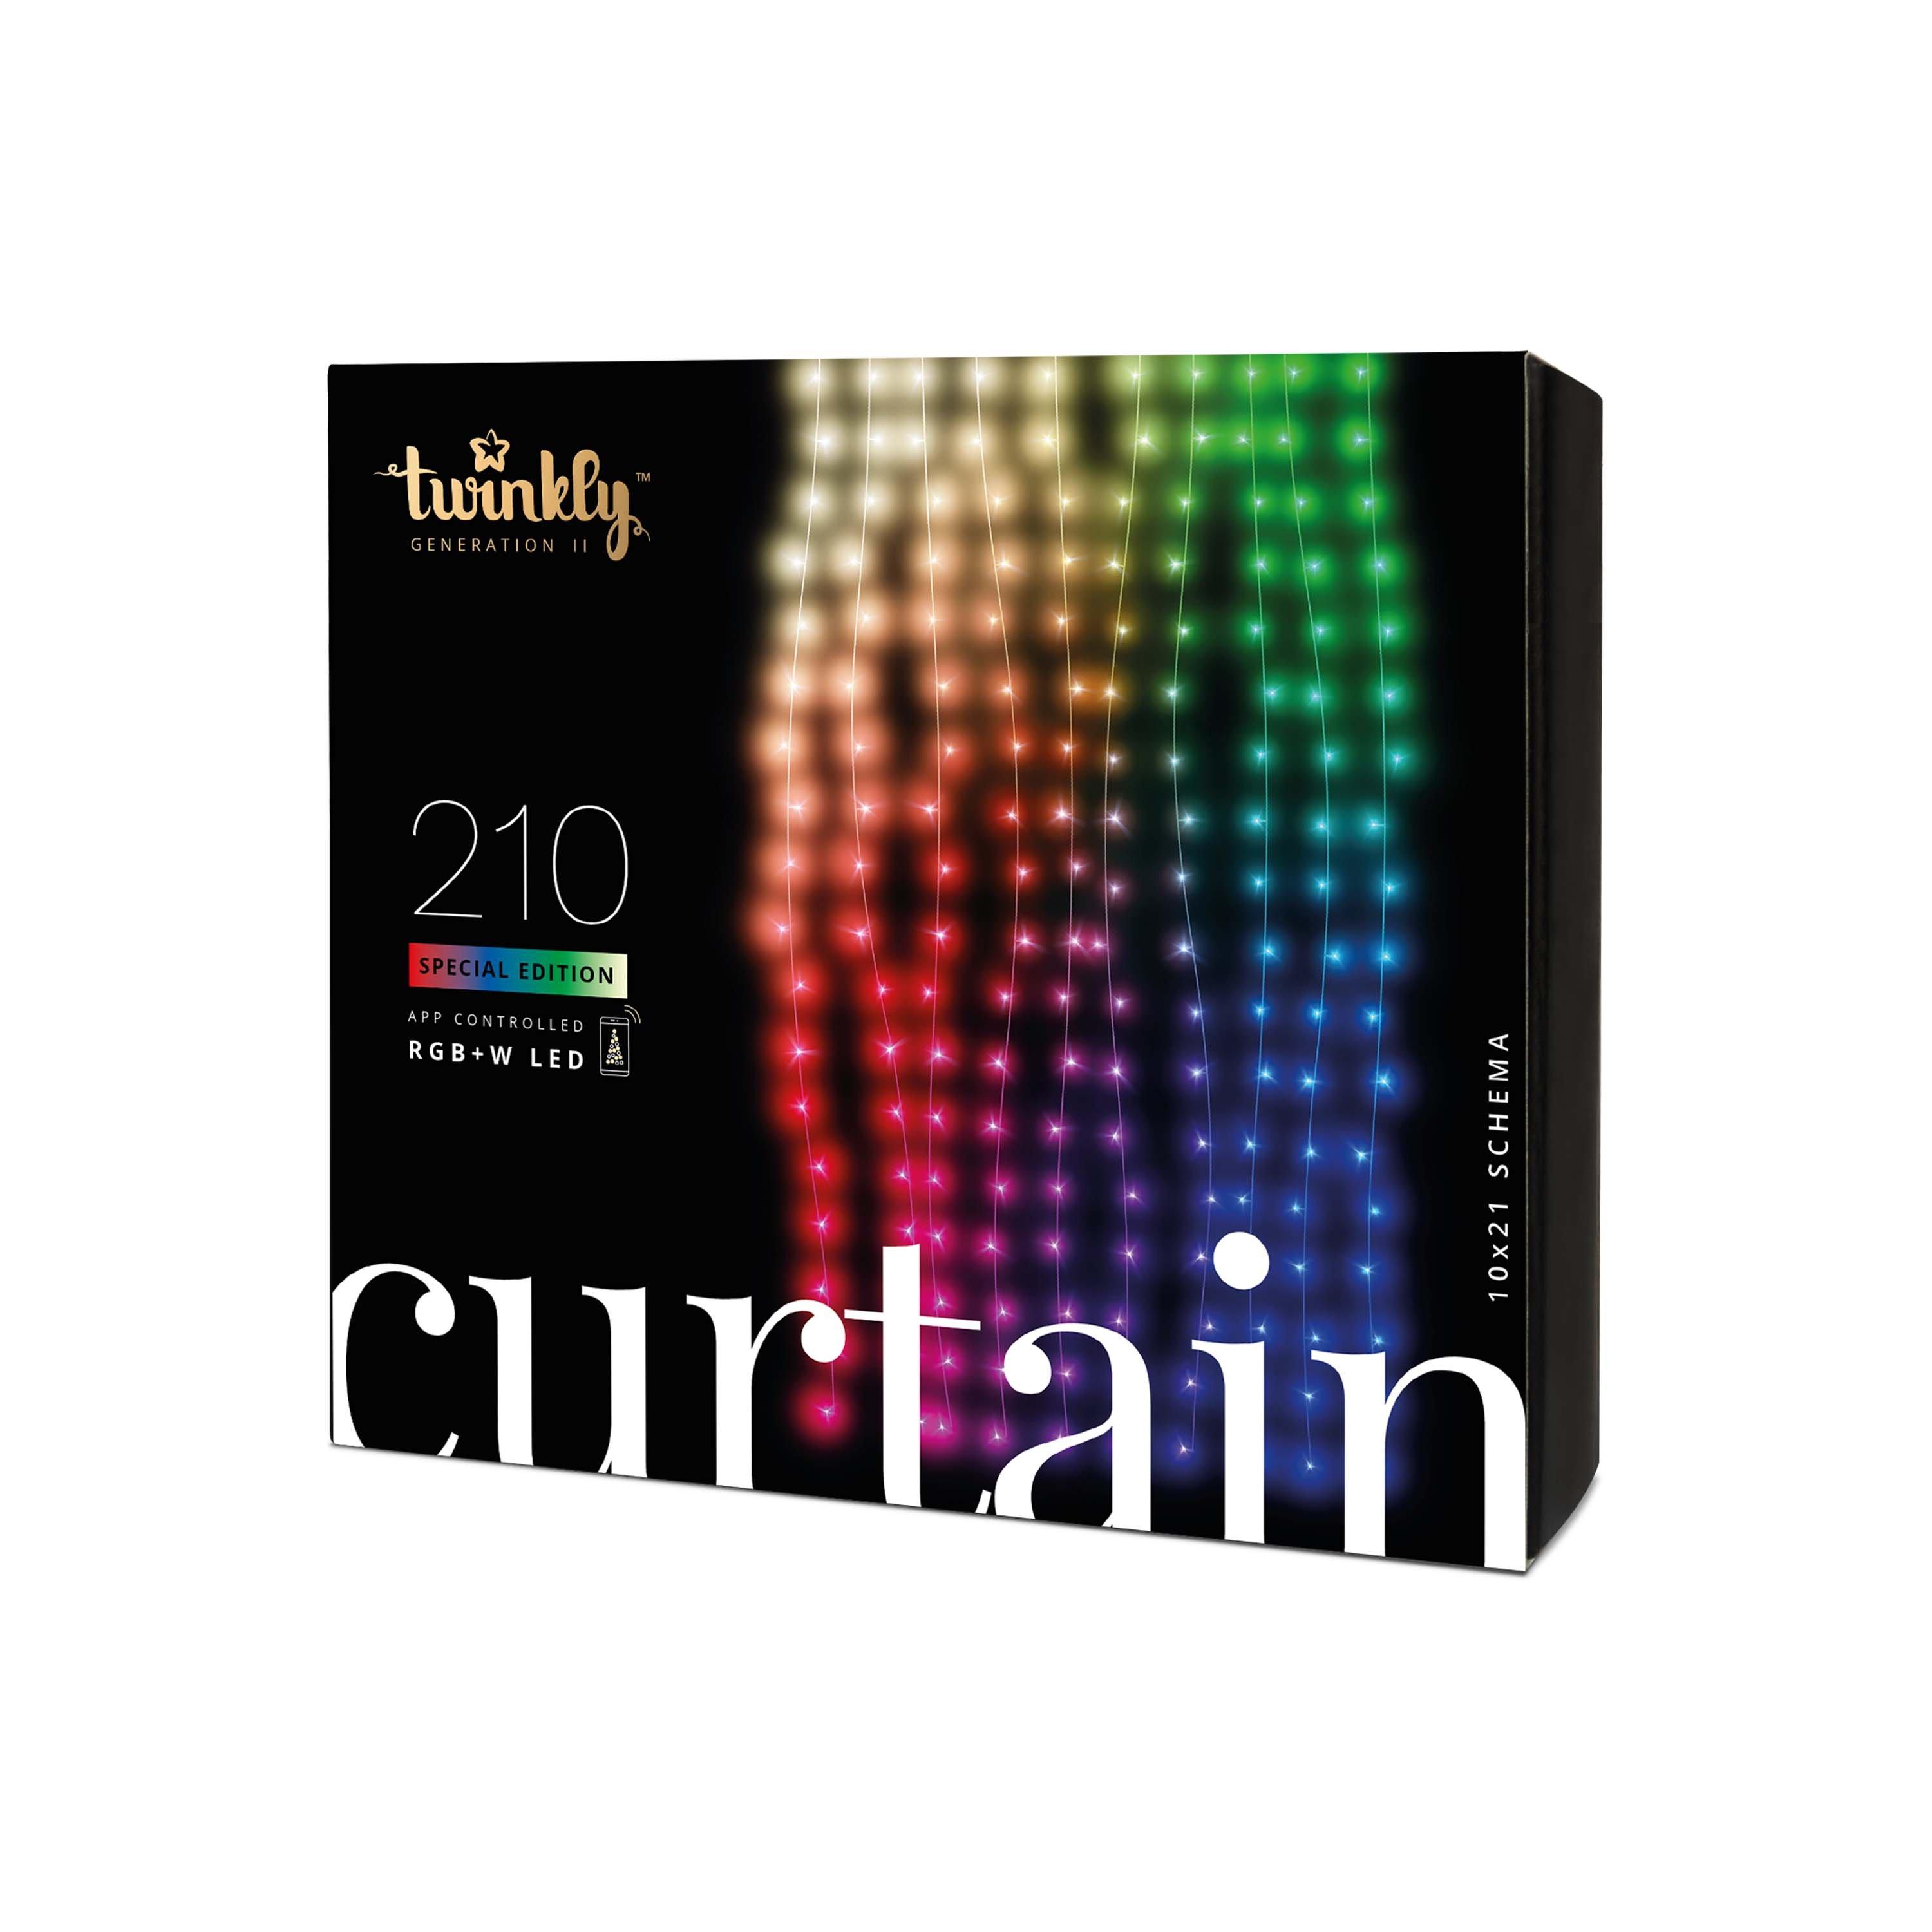 list item 2 of 7 Twinkly Curtain Generation II App Controlled 210 RGB LED Lights